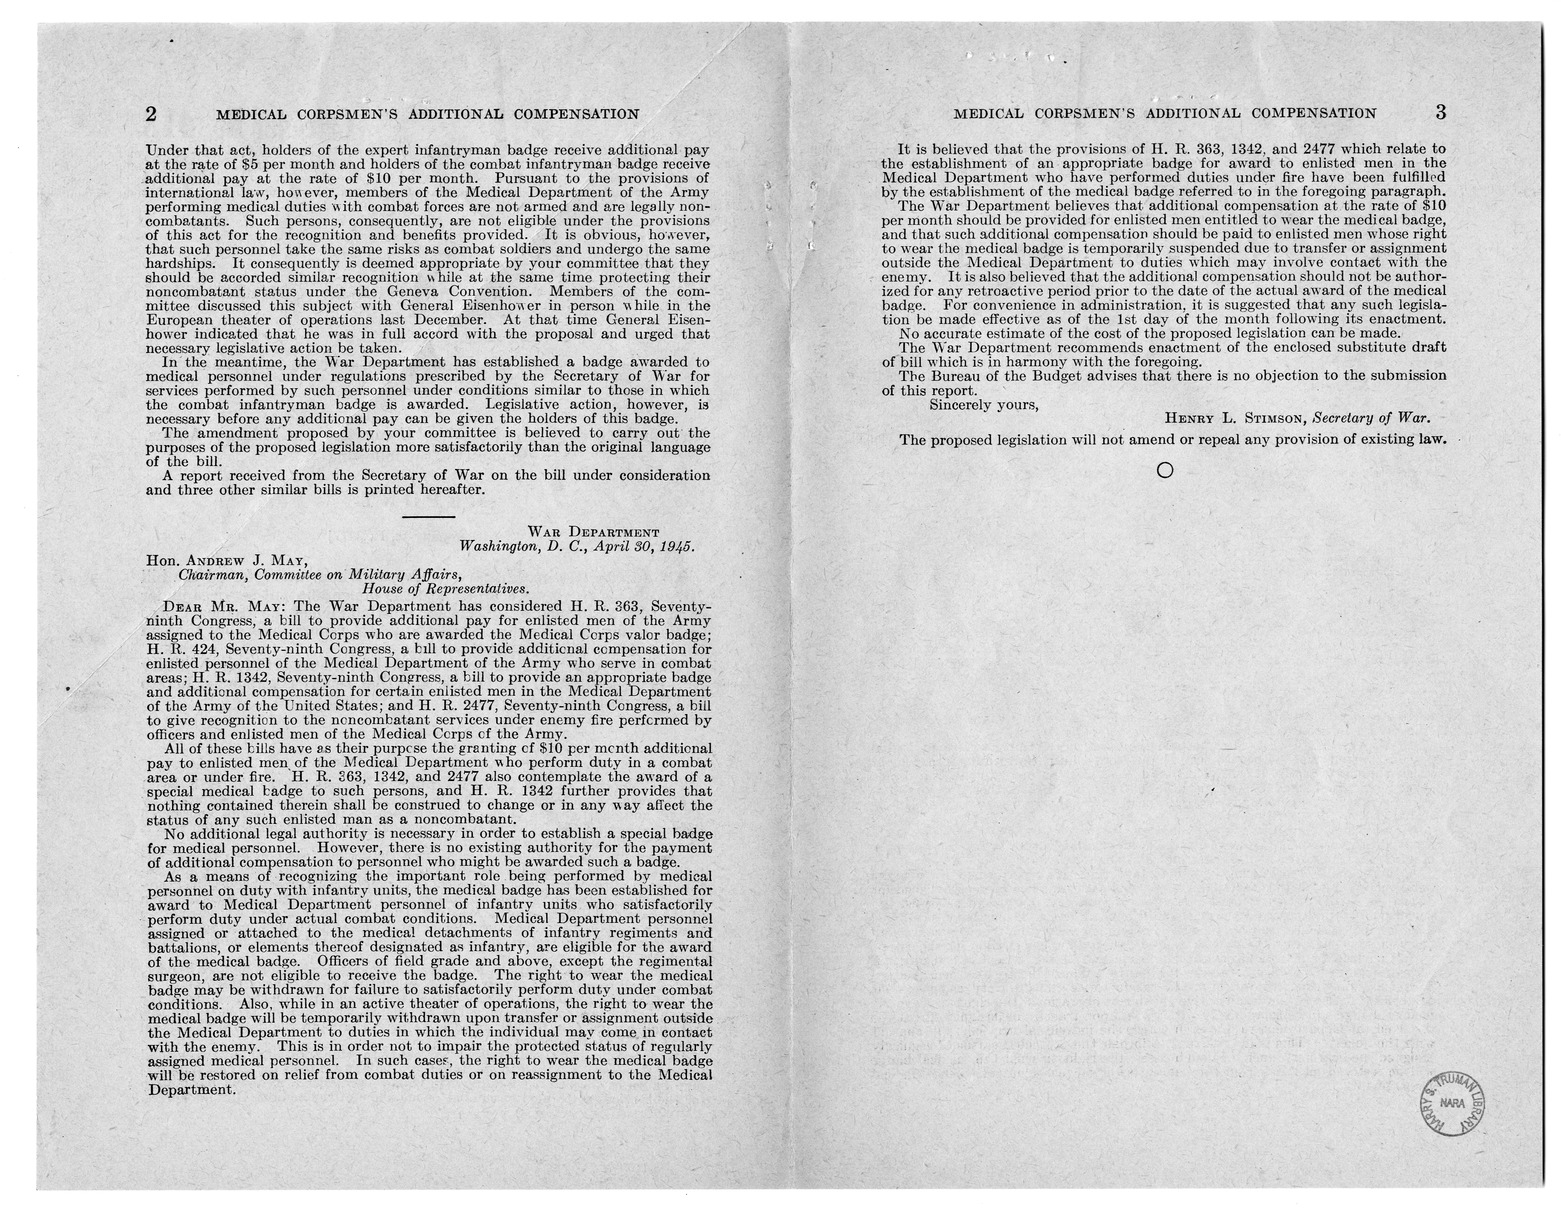 Memorandum from Frederick Bailey to M. C. Latta, H.R. 2477, To Give Recognition to the Noncombatant Services Under Enemy Fire Performed by Officers and Enlisted Men of the Medical Corps of the Army, with Attachments